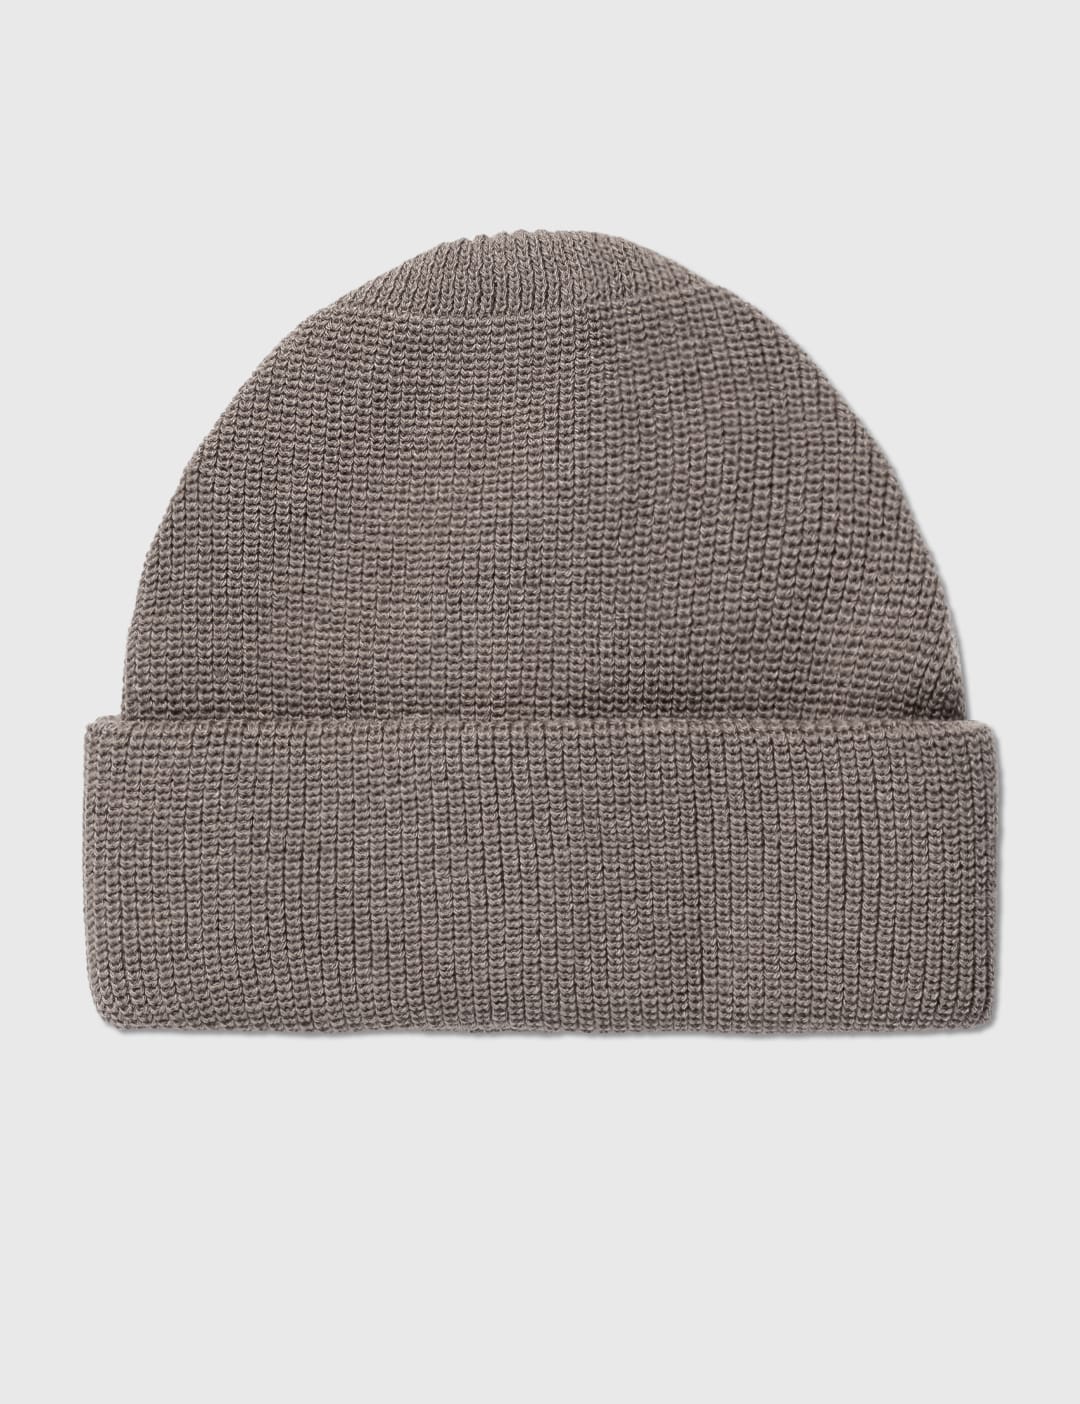 TIGHTBOOTH - Flight Beanie | HBX - Globally Curated Fashion and 